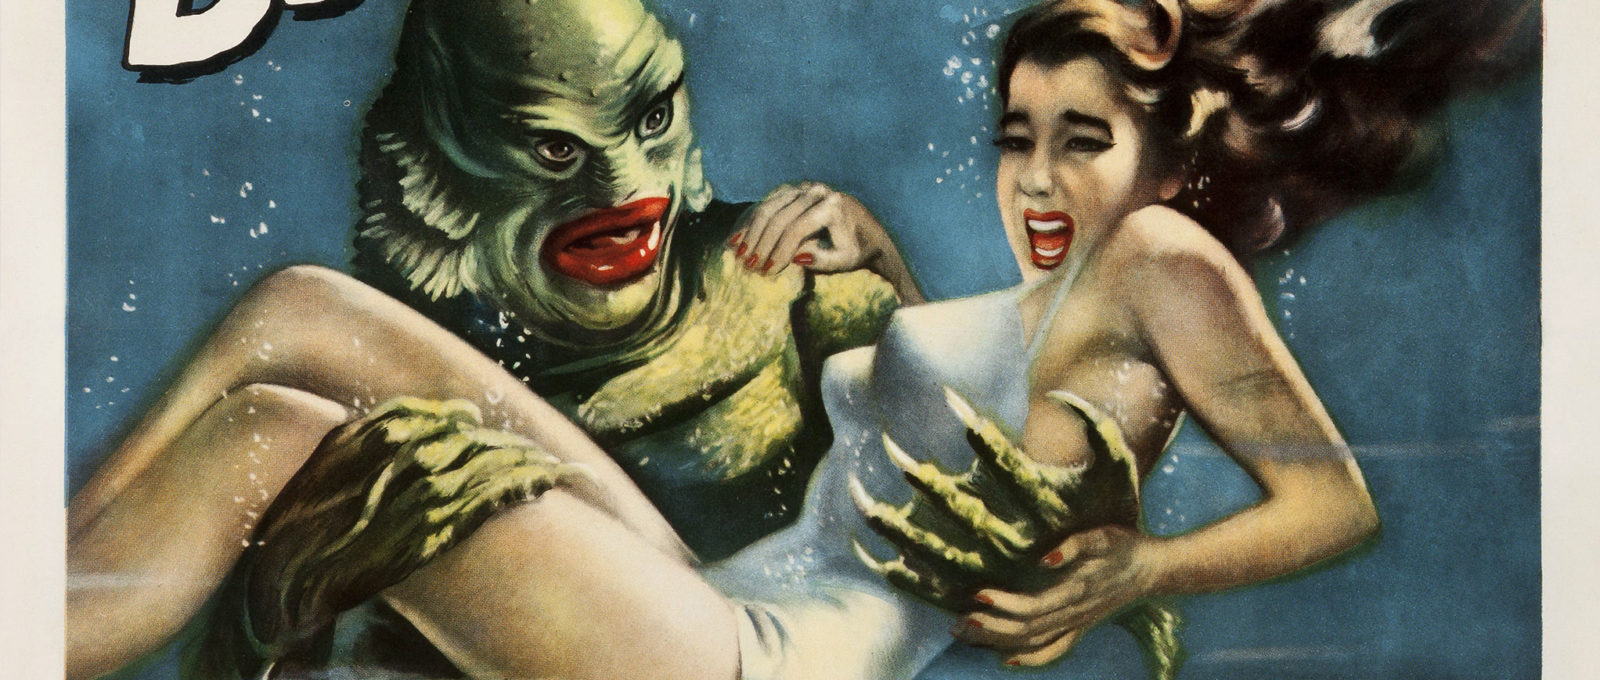 Creature from the Black Lagoon movie poster